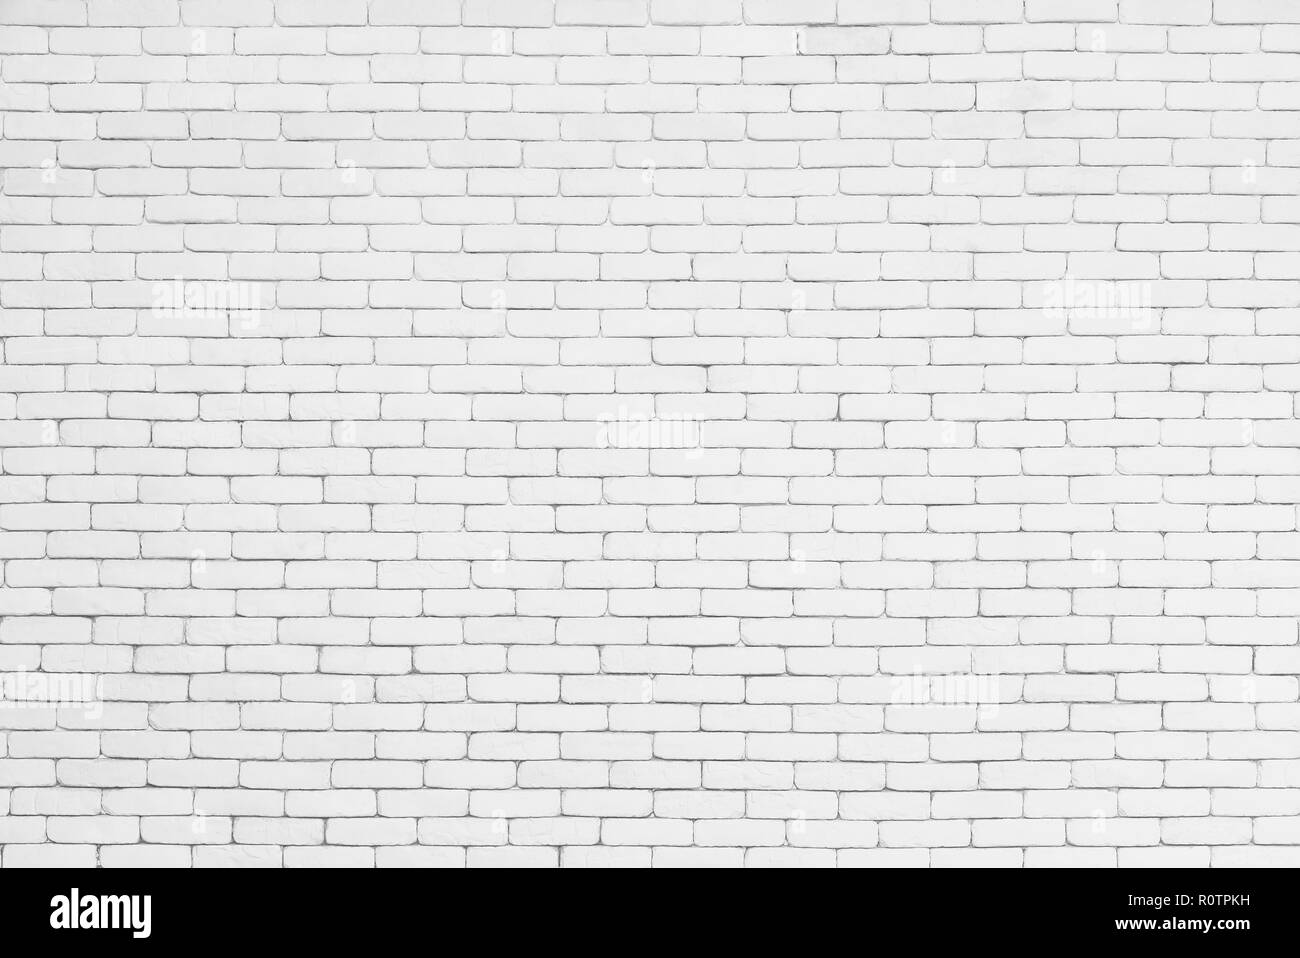 Abstract background from white brick pattern wall. Brickwork texture surface for vintage backdrop. Stock Photo